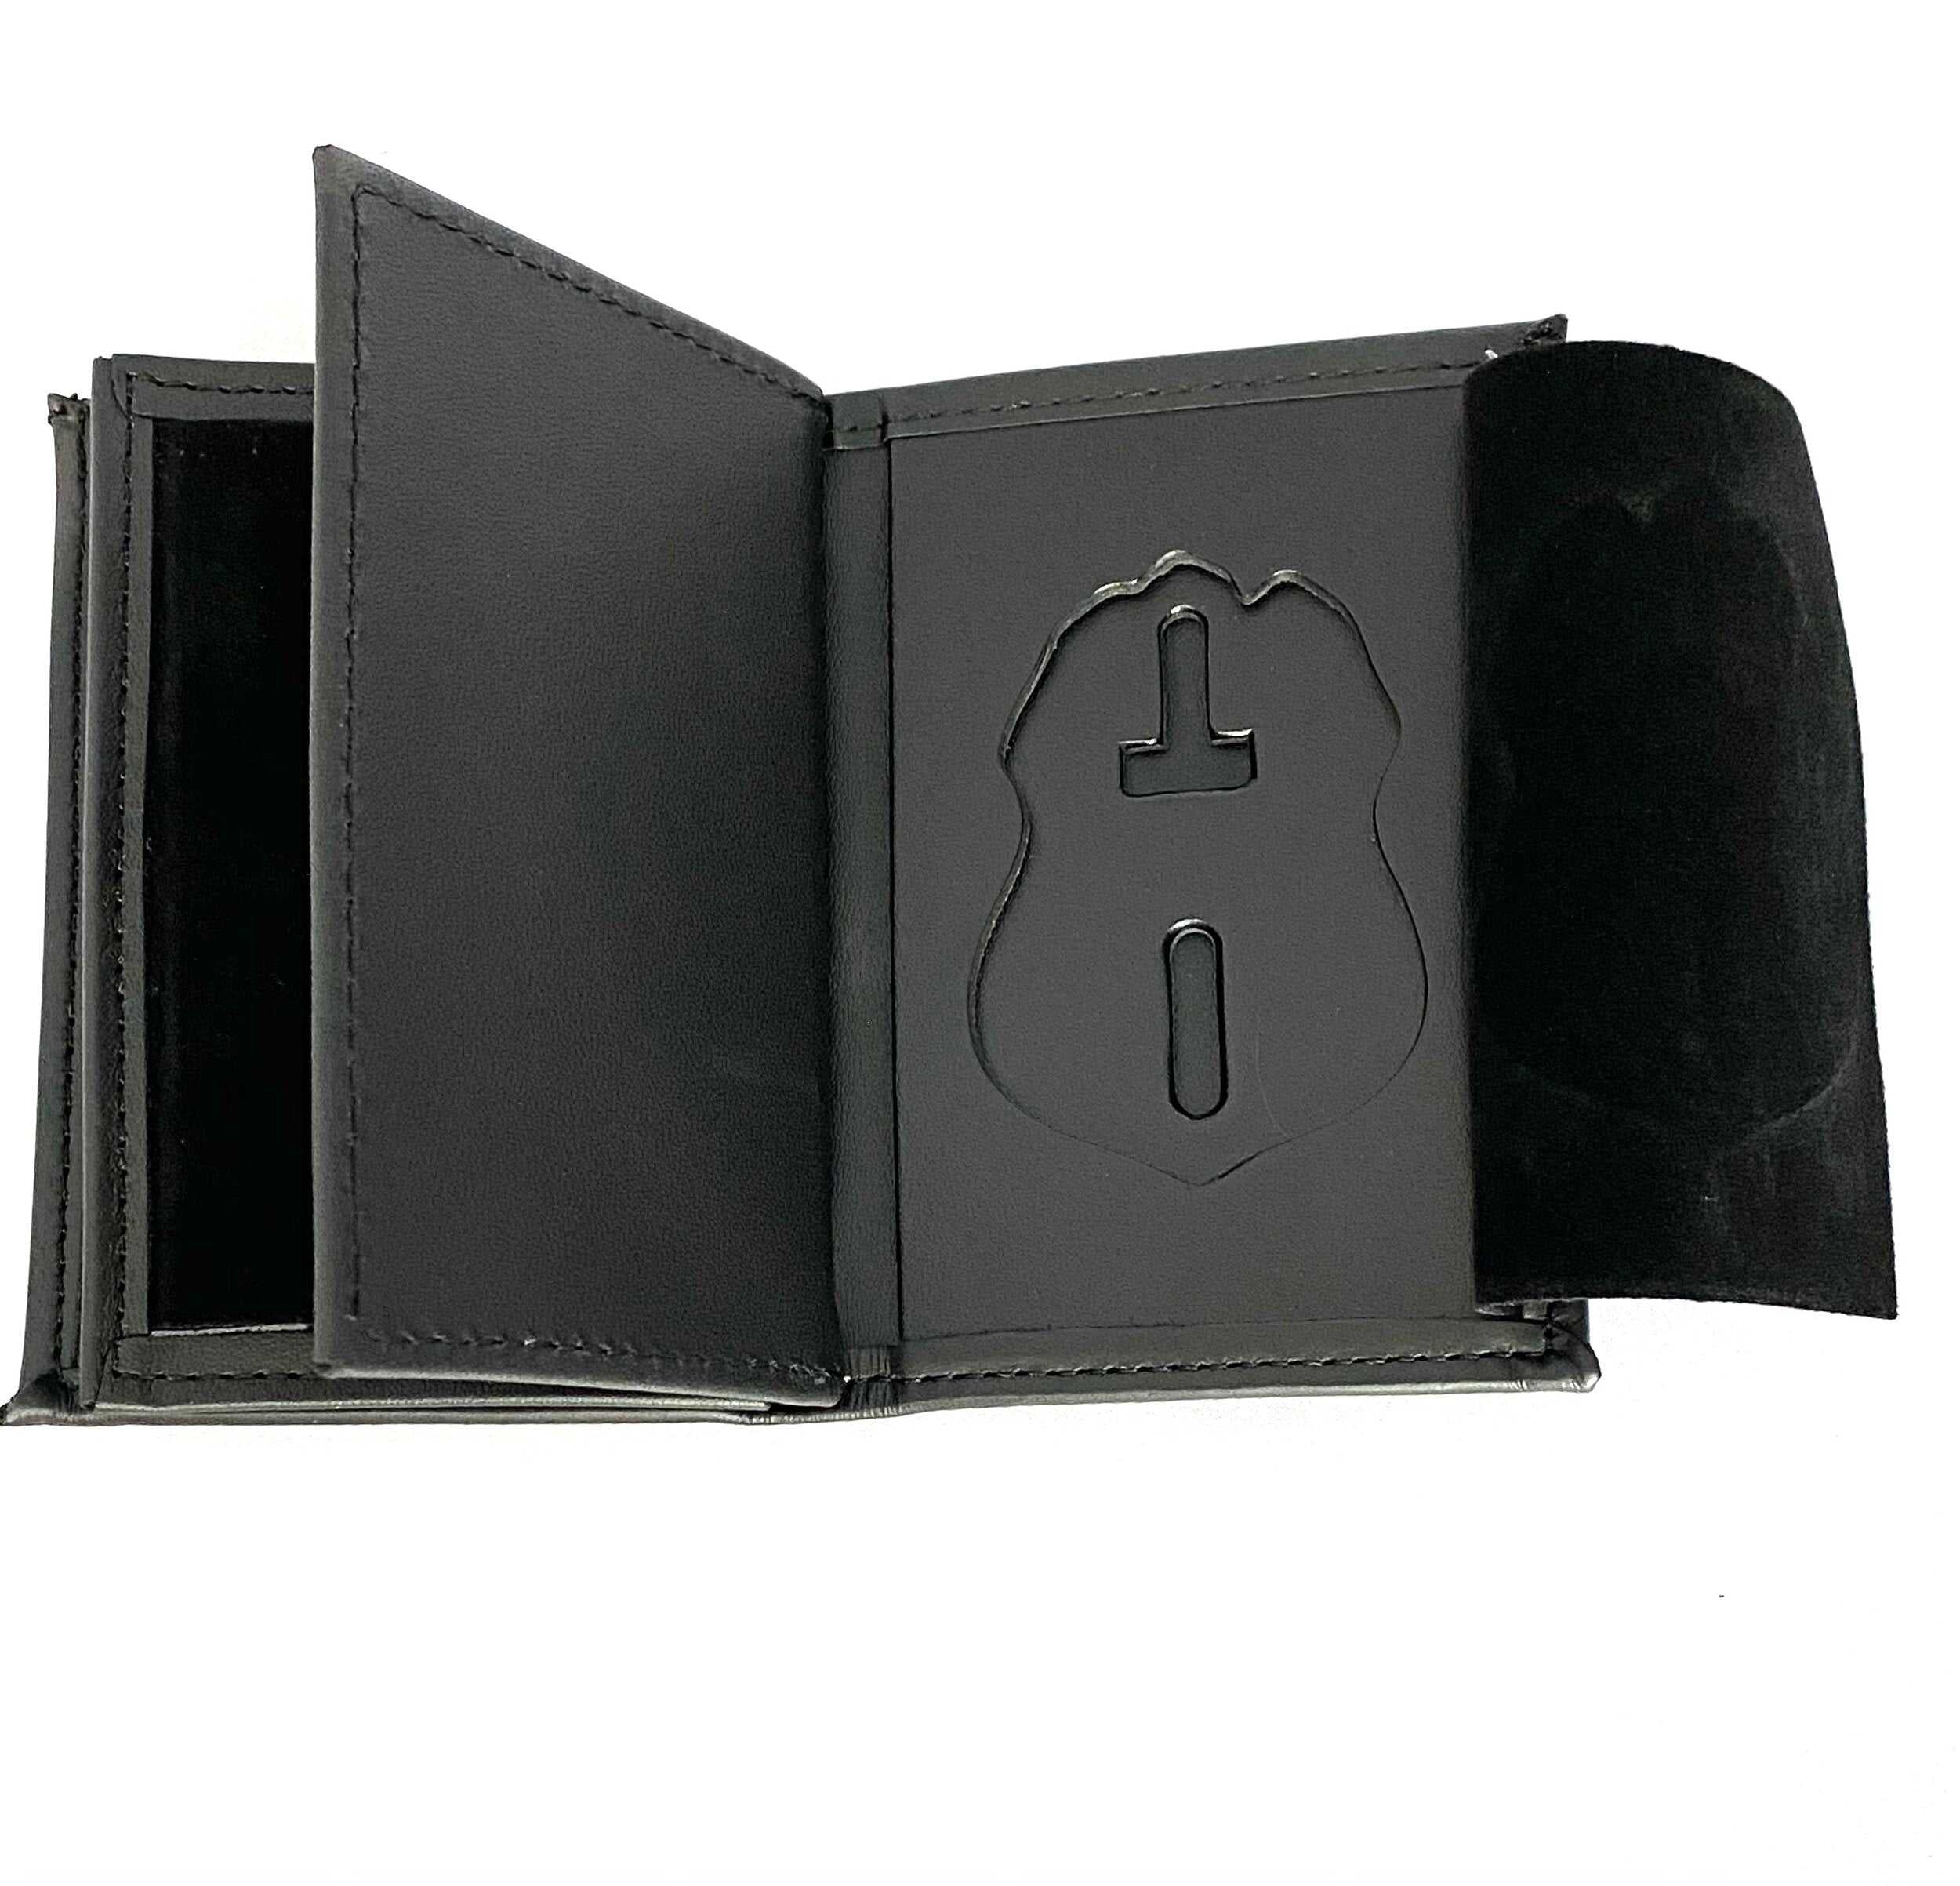 FBI Badge Cut-out Wallet to Hold Dual ID Cards badge and ID 